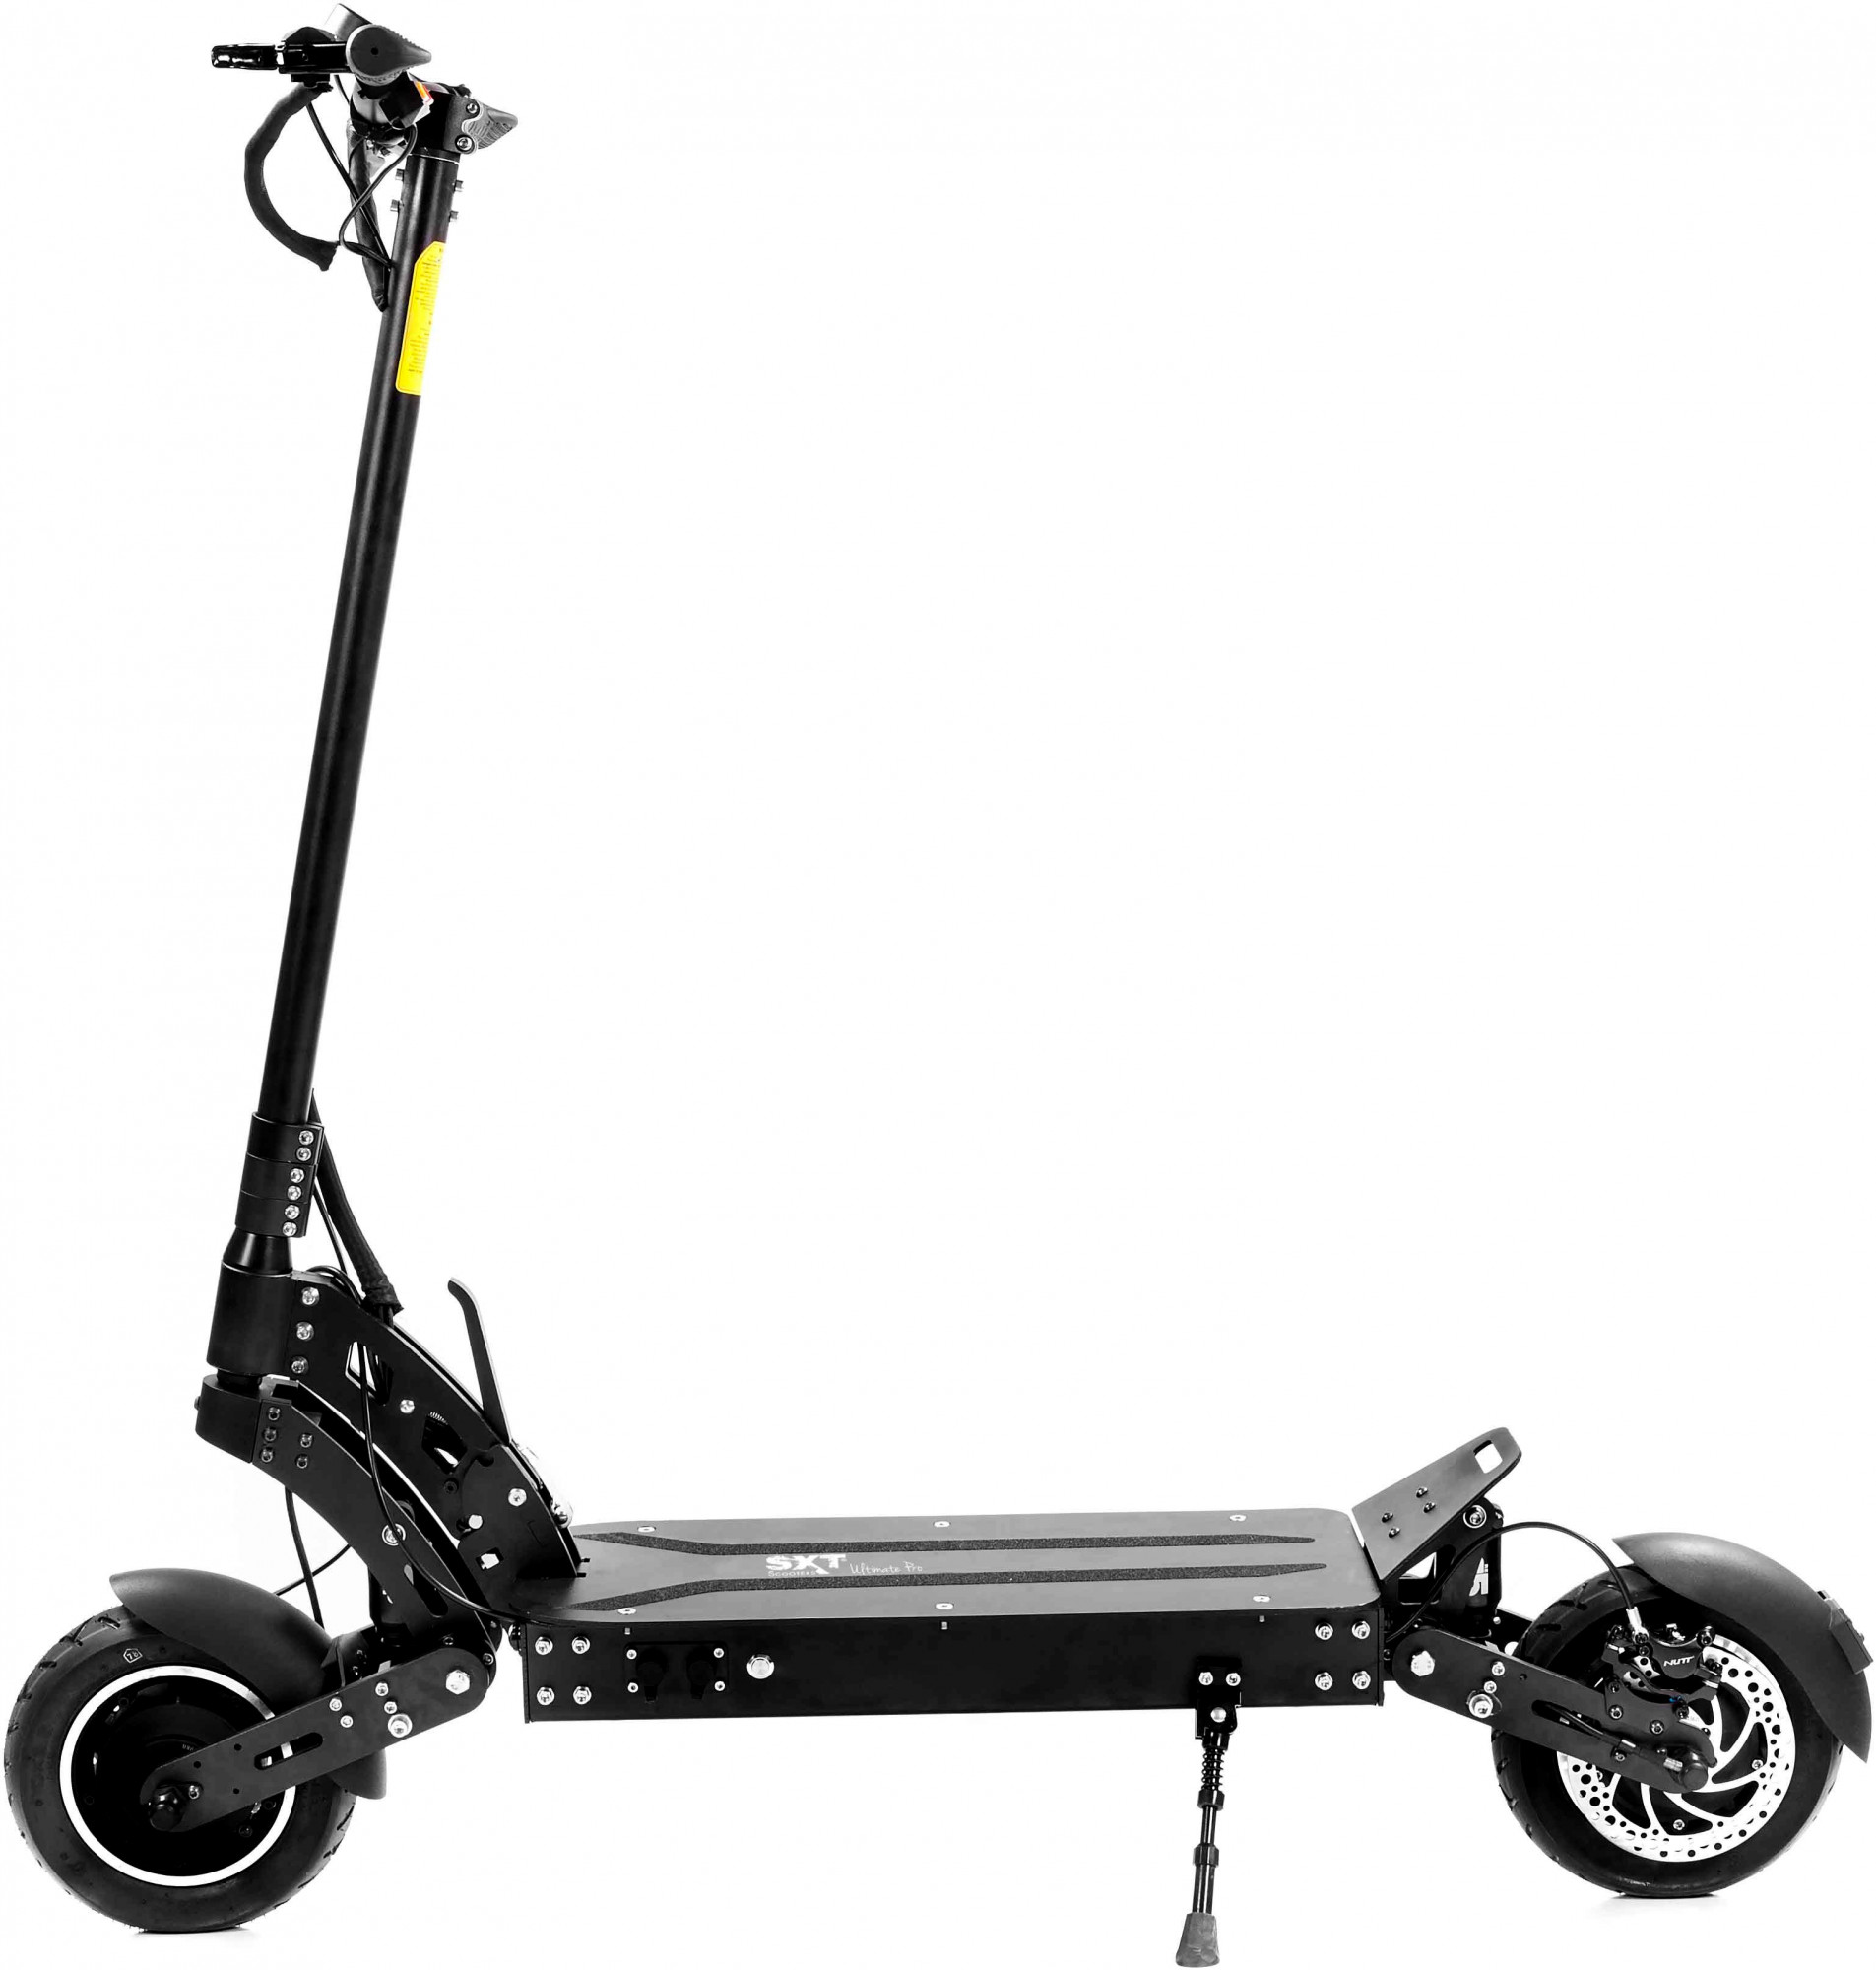 SXT Ultimate PRO electric scooter in stock - Enjoy the ride